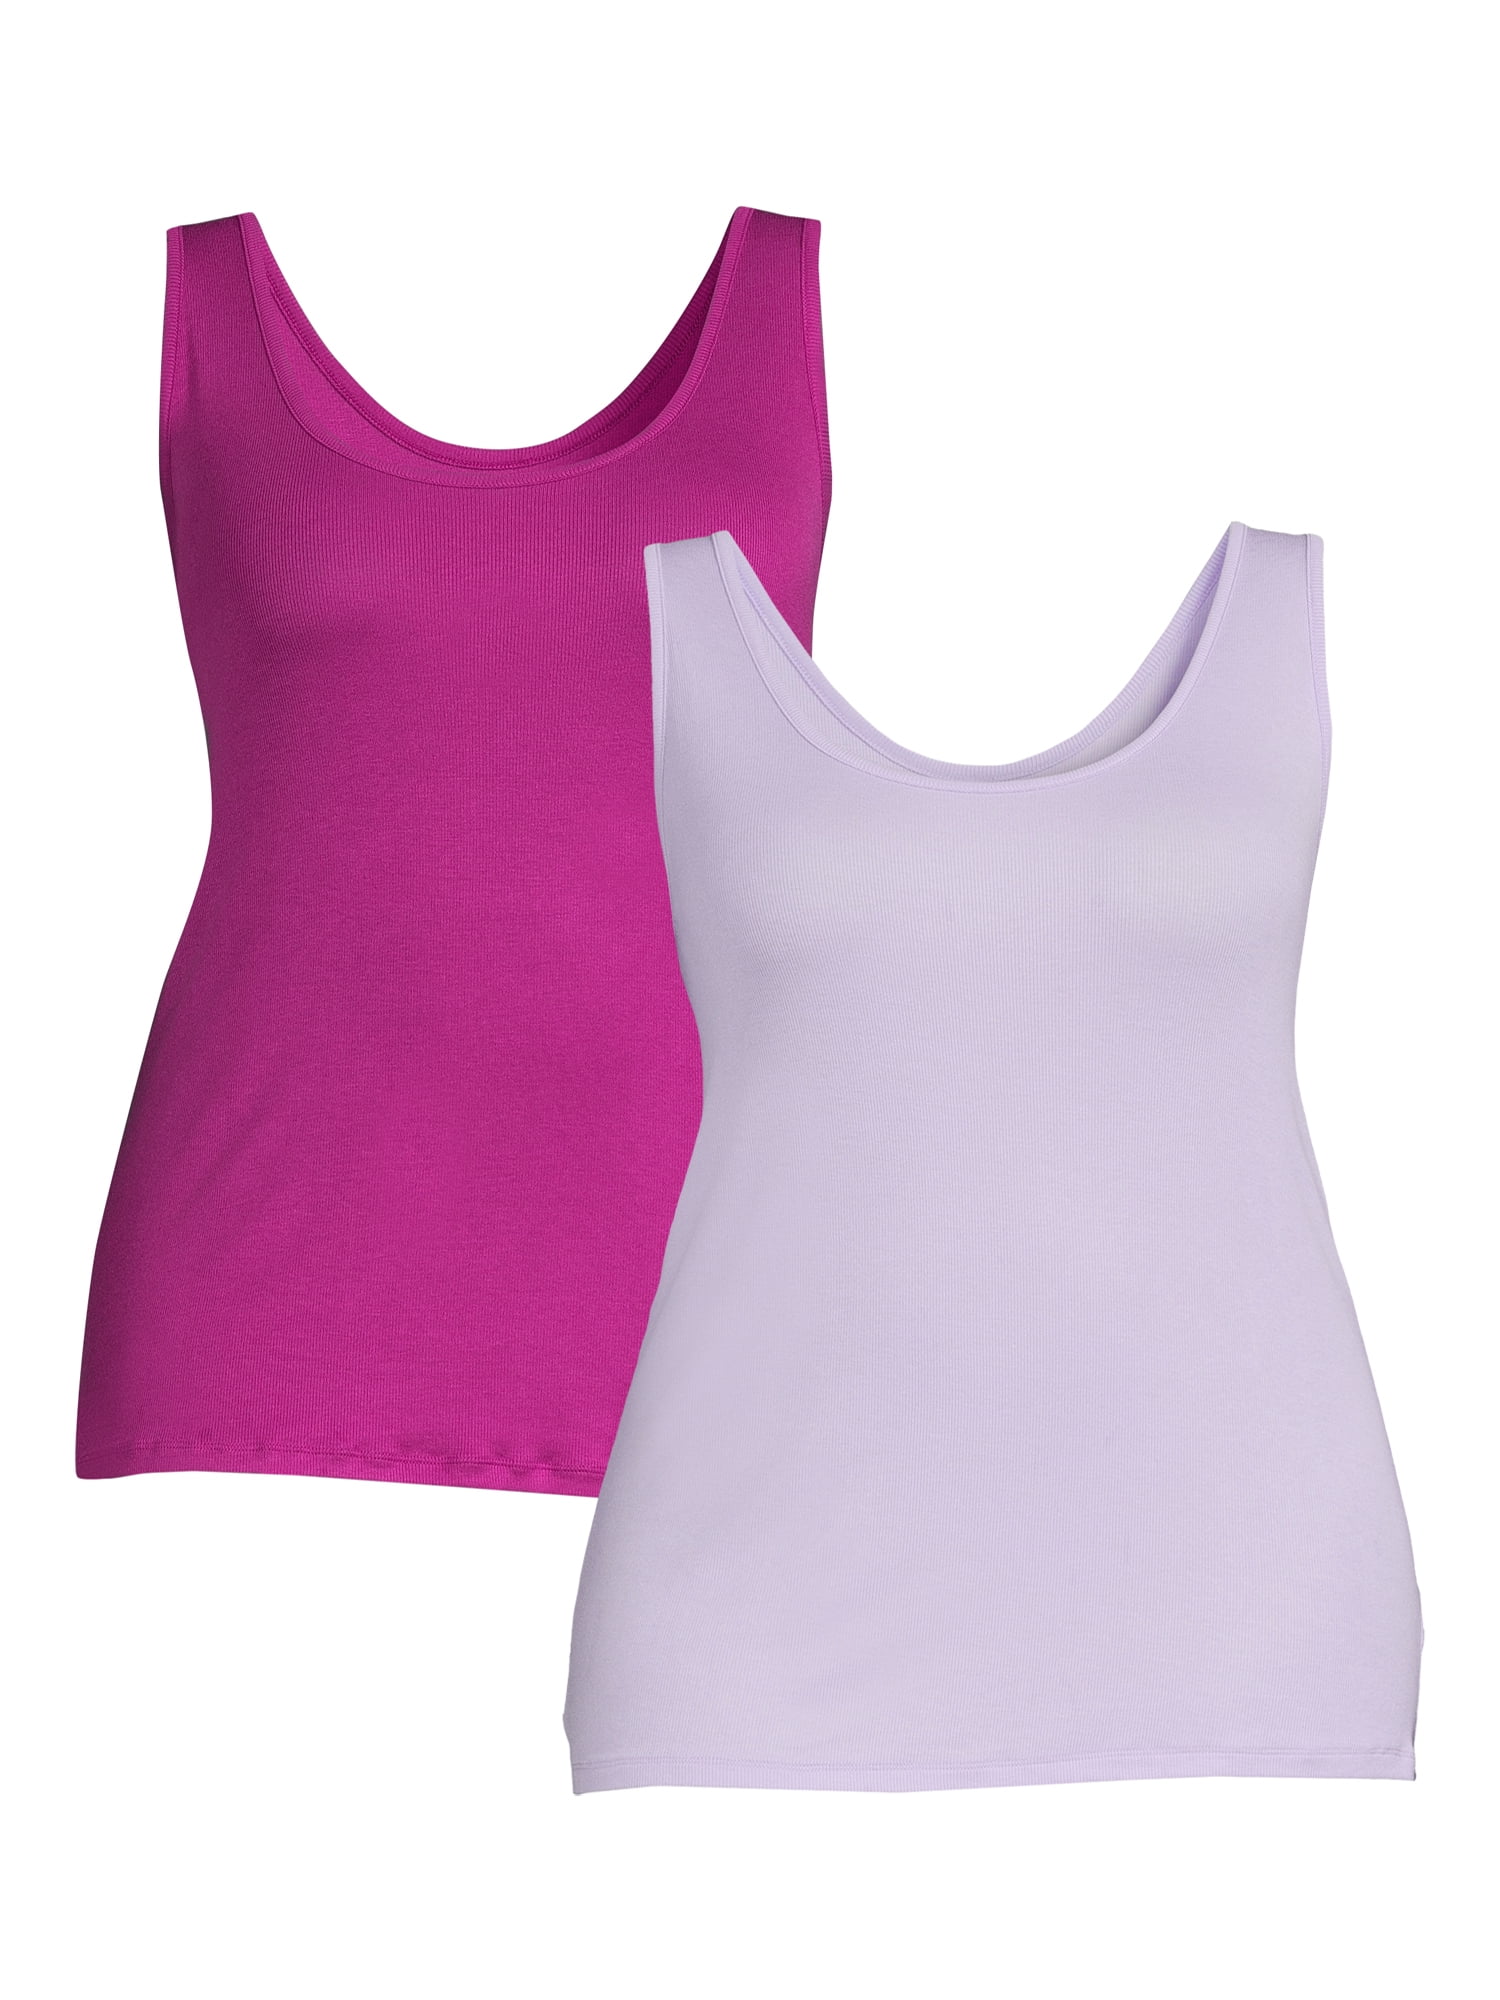 NELEUS Womens Compression Base Layer Dry Fit Tank Top 3 Pack,Blackish  Green+Purple+Pink,US Size XL 